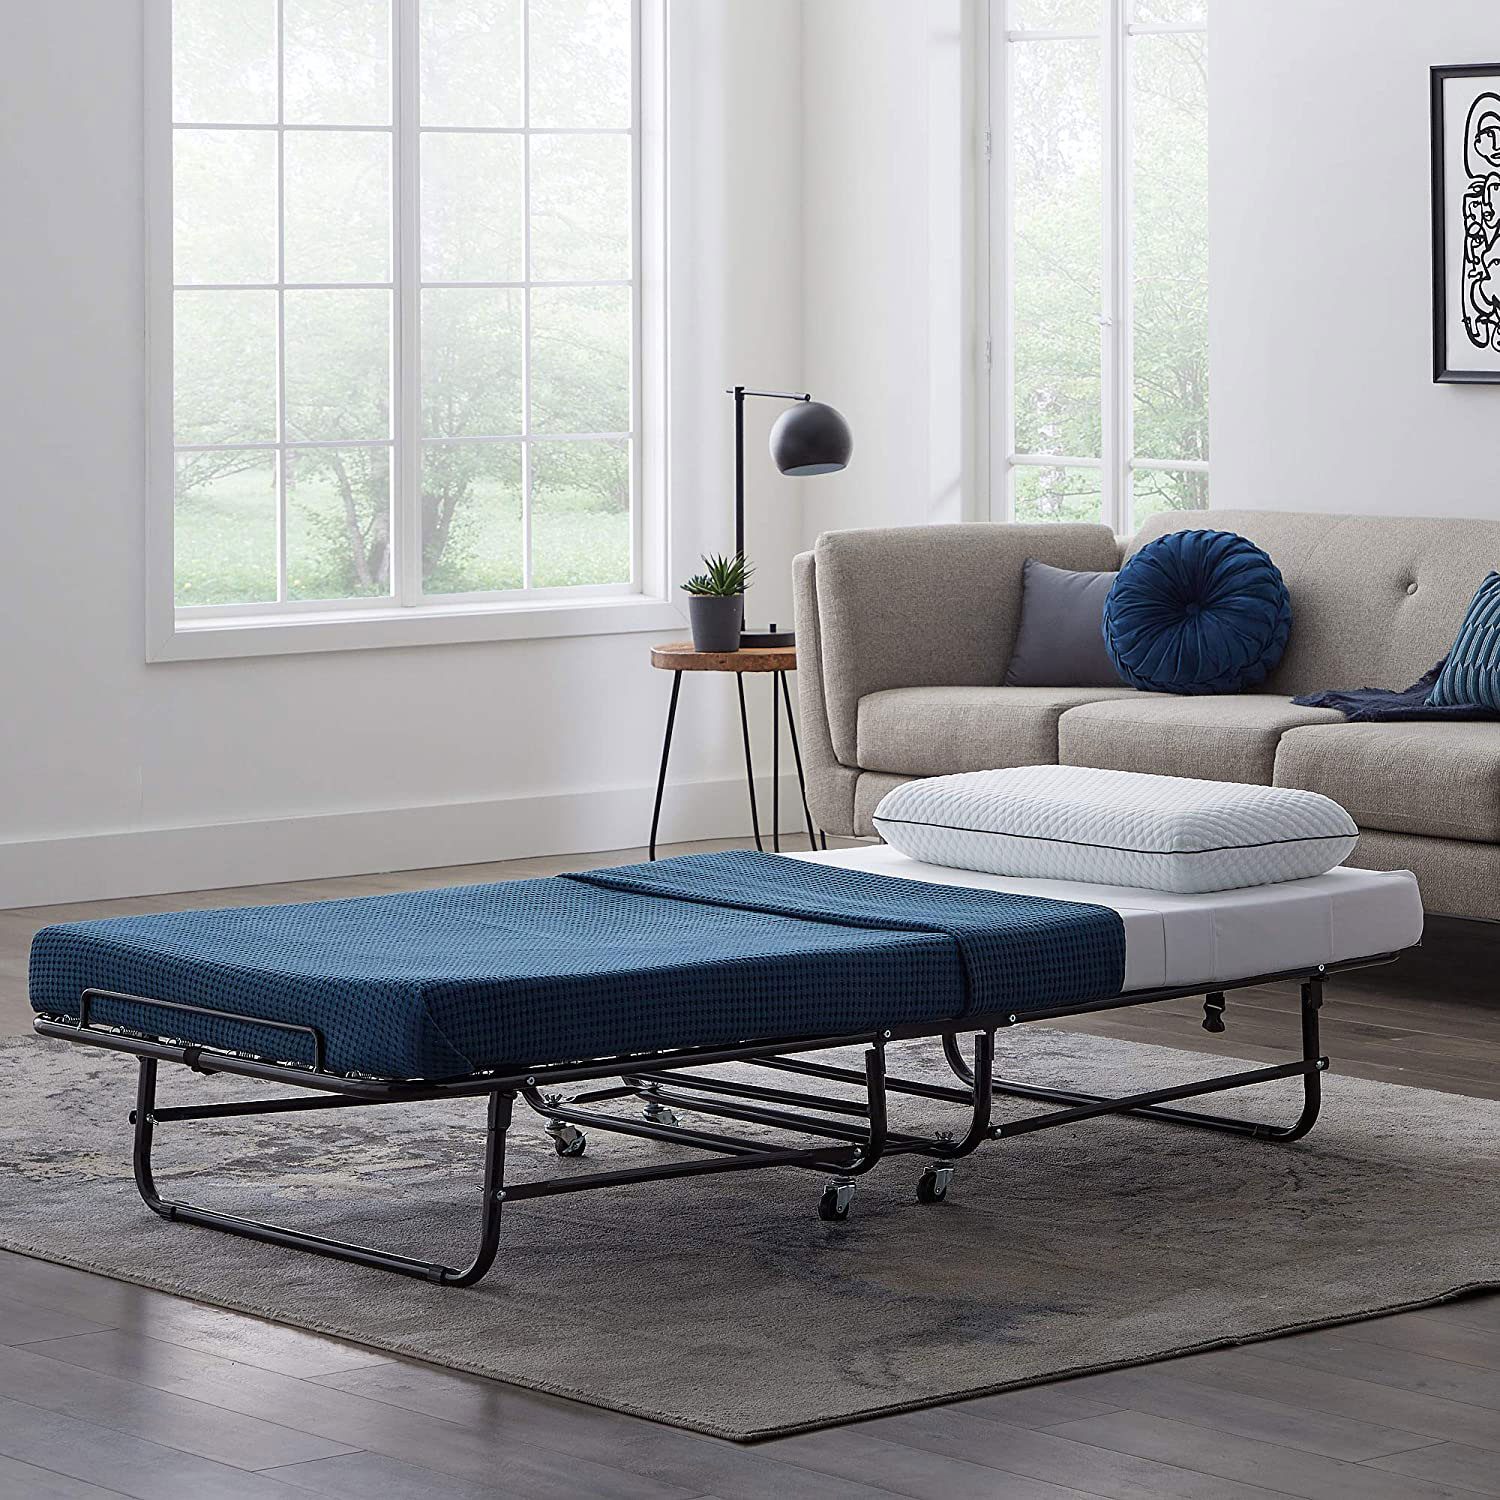 The Best Folding Beds For Hosting, Twin Size Folding Air Bed Frame